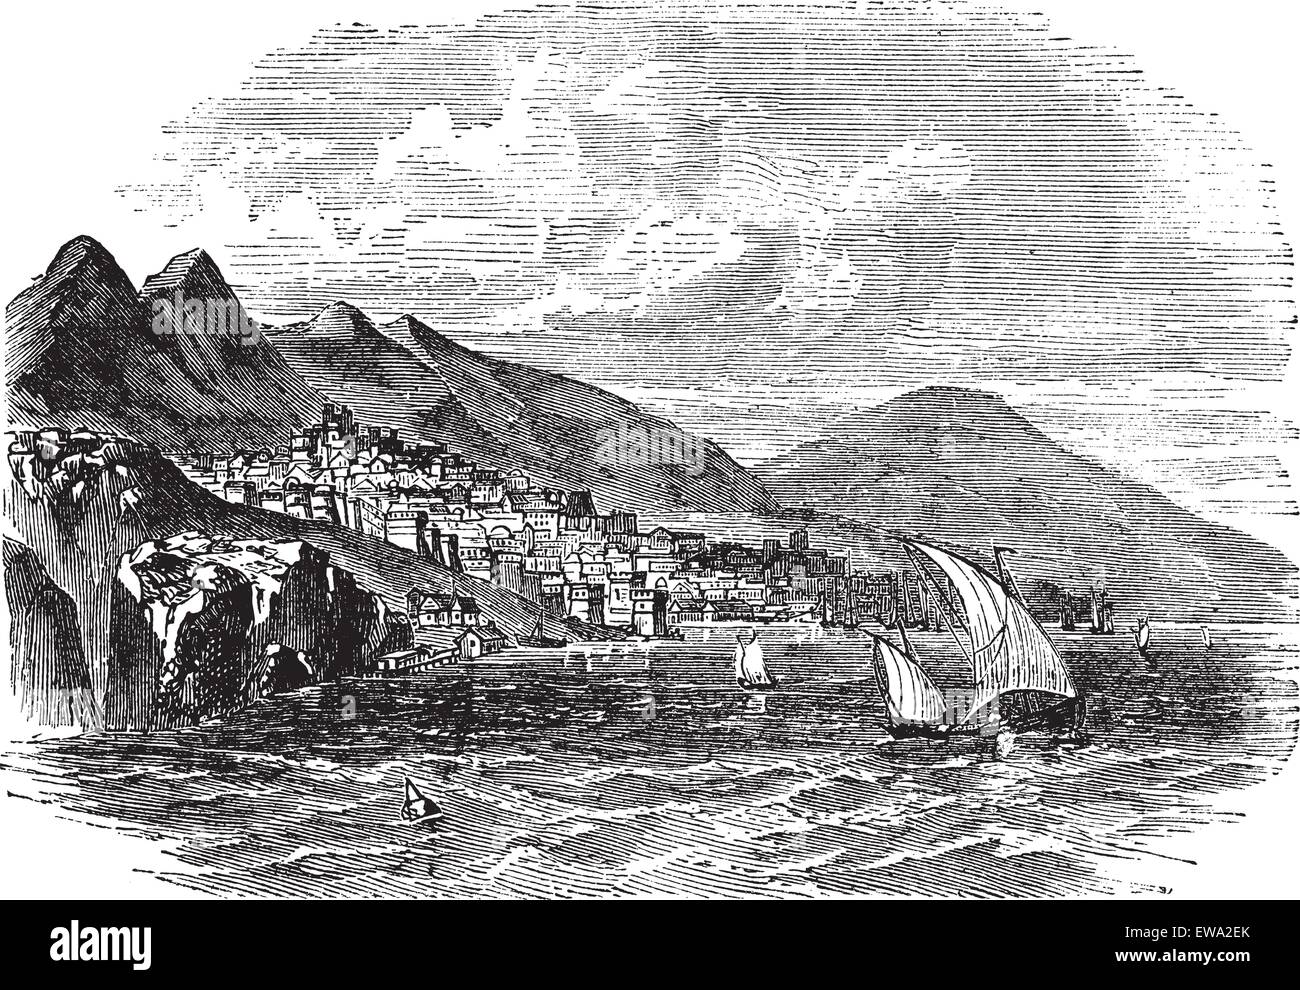 Feodosiya or Theodosia or Caffa or Kaffa in Crimea, Ukraine, during the 1890s, vintage engraving. Old engraved illustration of Feodosiya with lake in front. Stock Vector